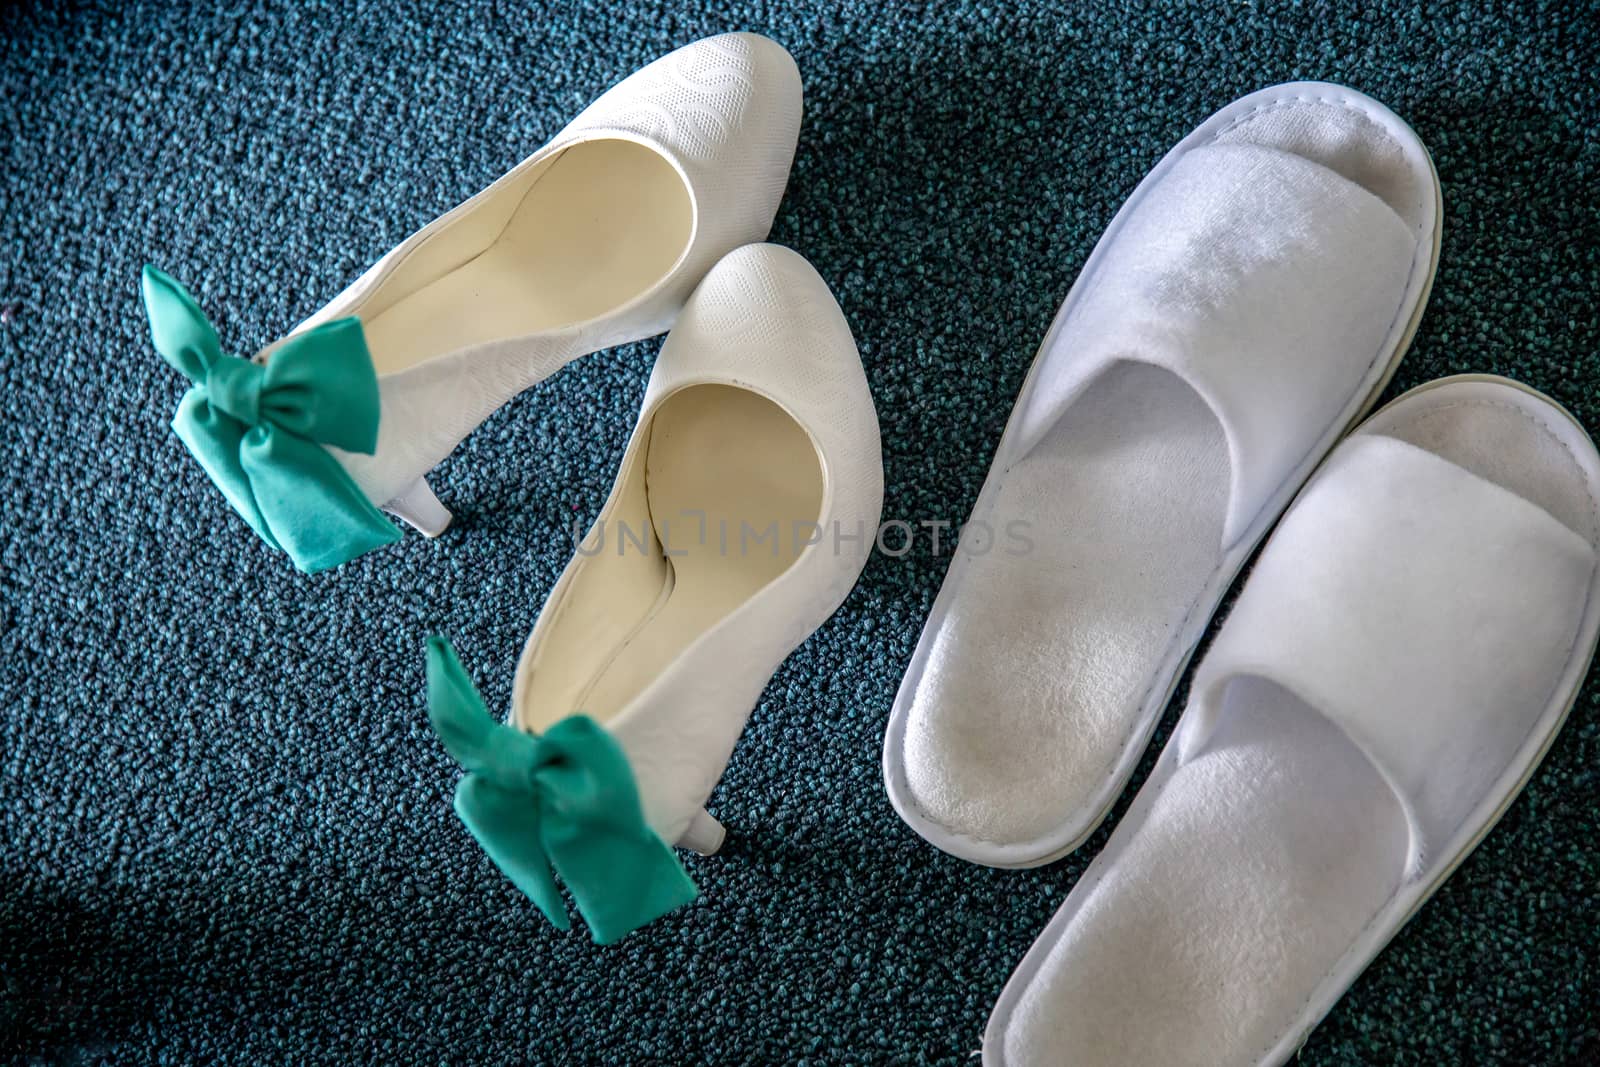 White bridal shoes and wedding slippers on carpet. Wedding shoes with ribbons and white slippers.